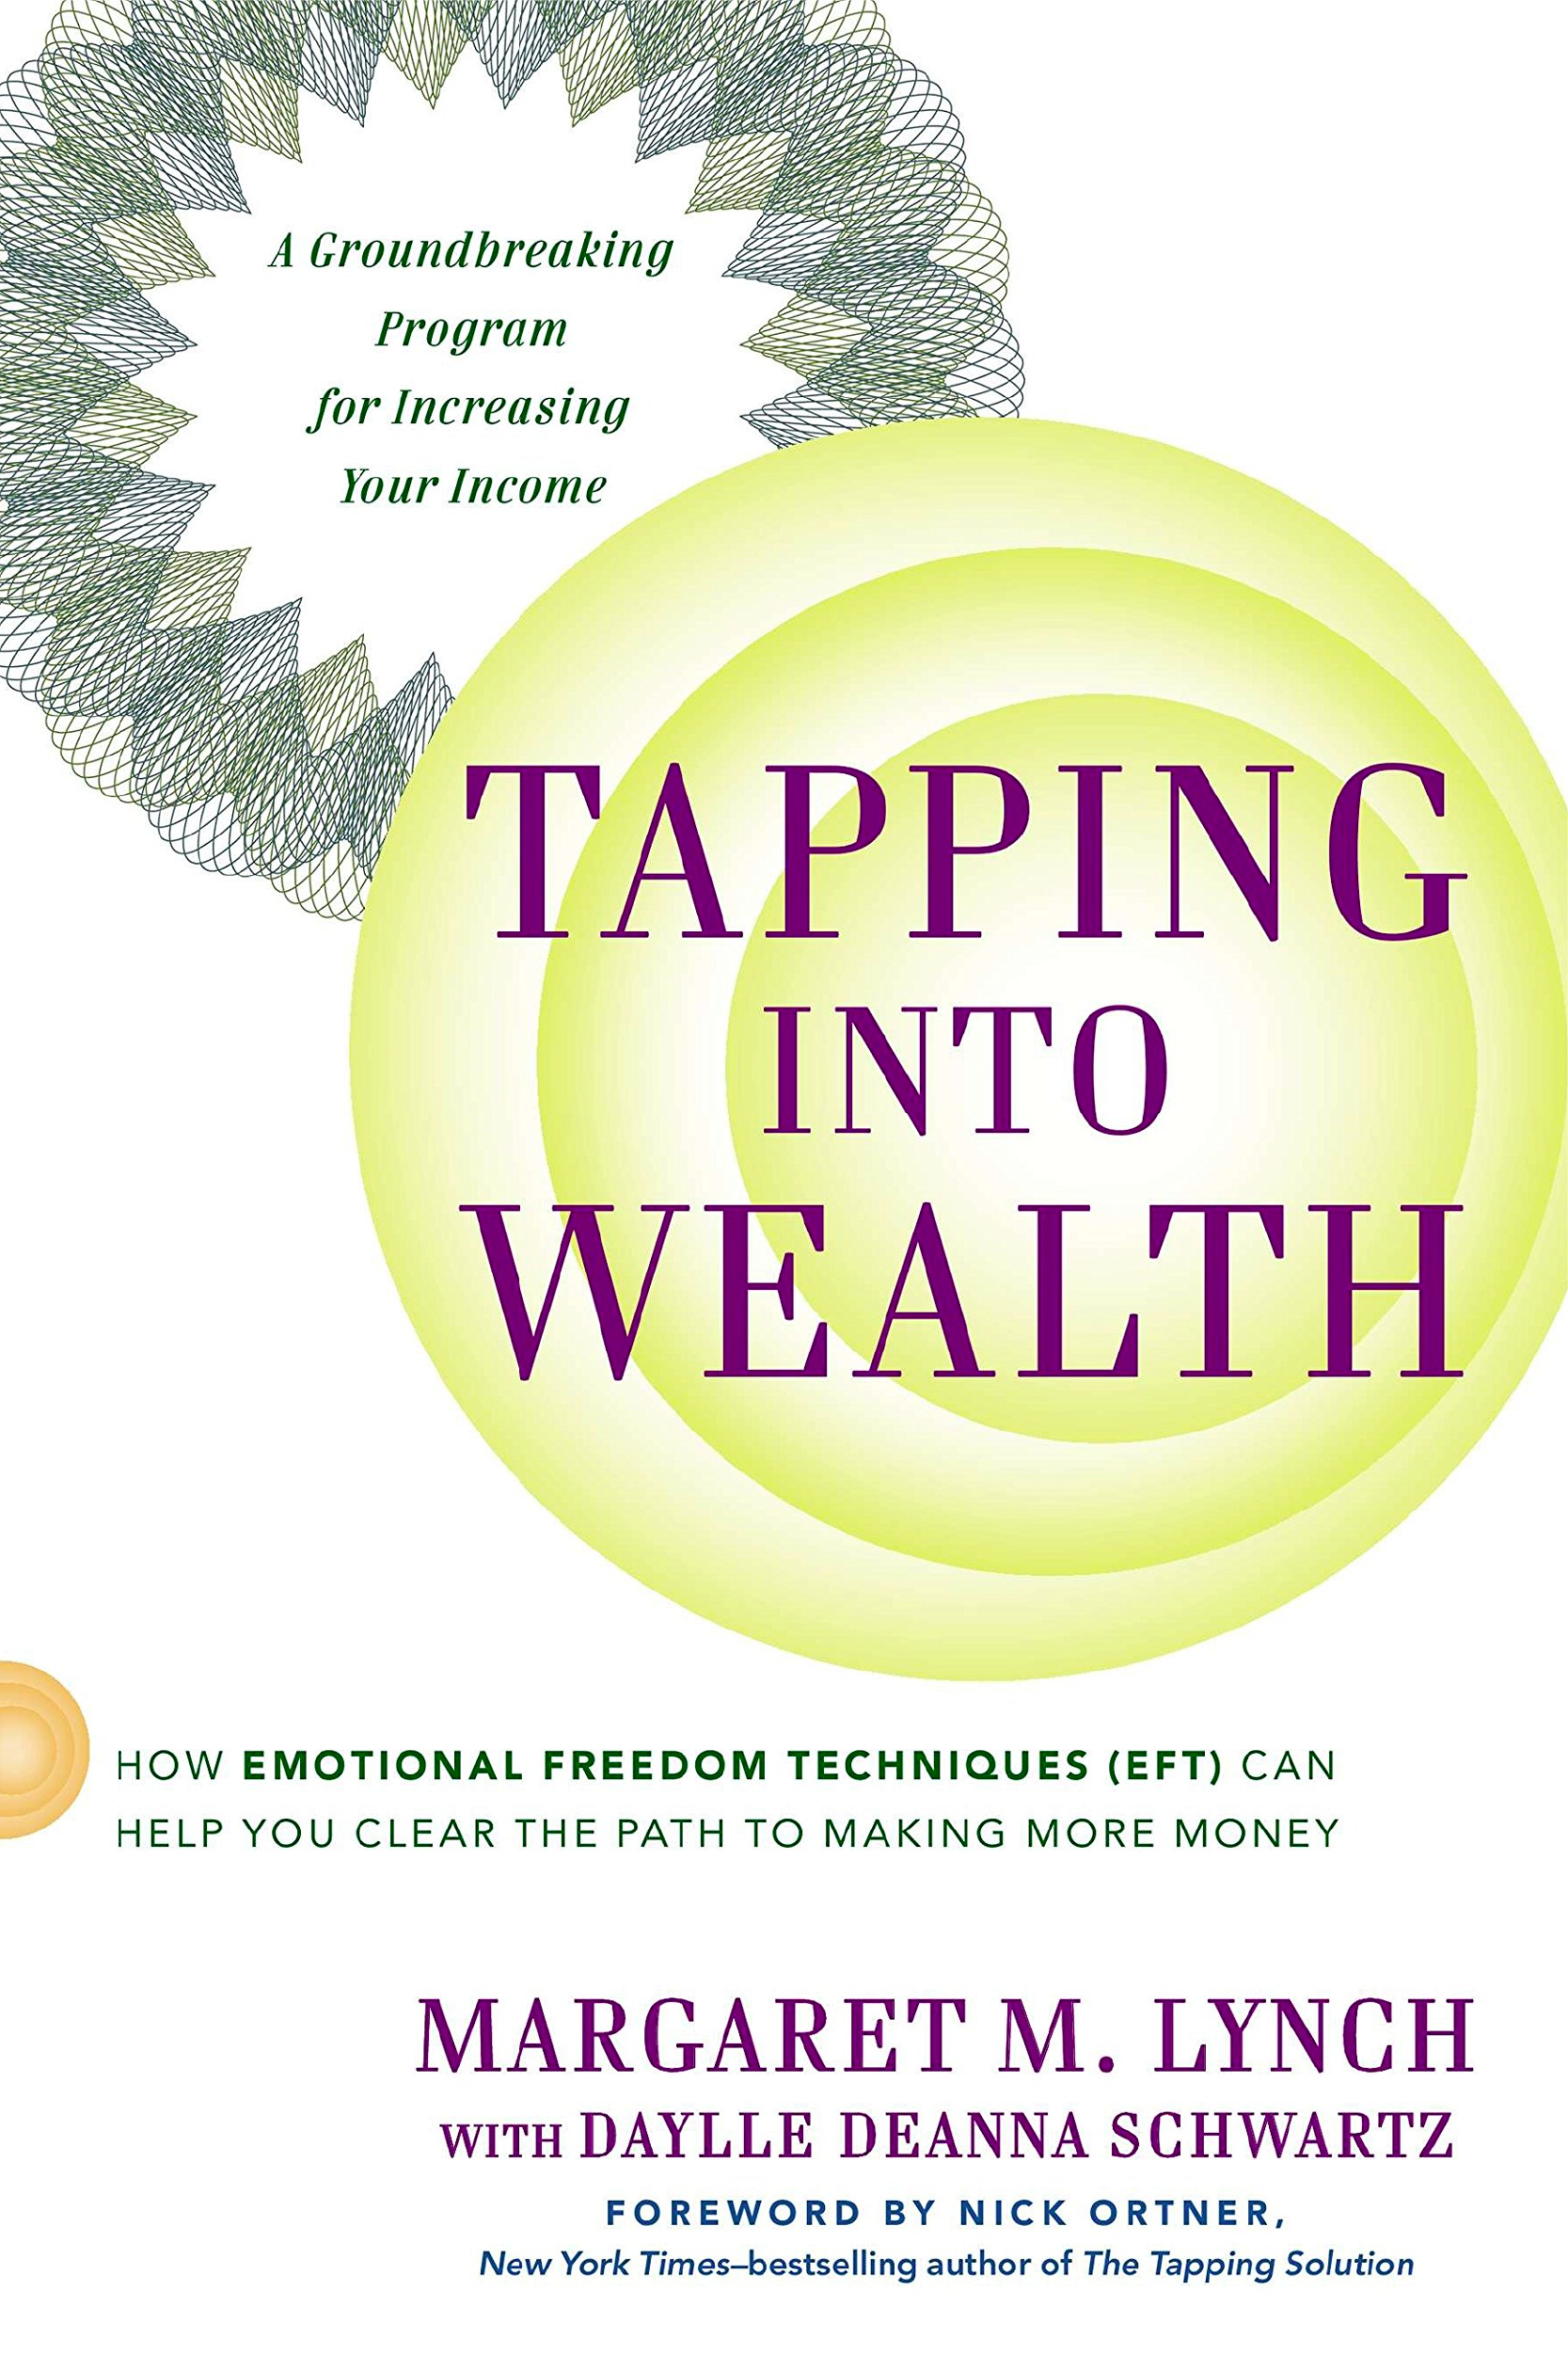 Tapping into Wealth